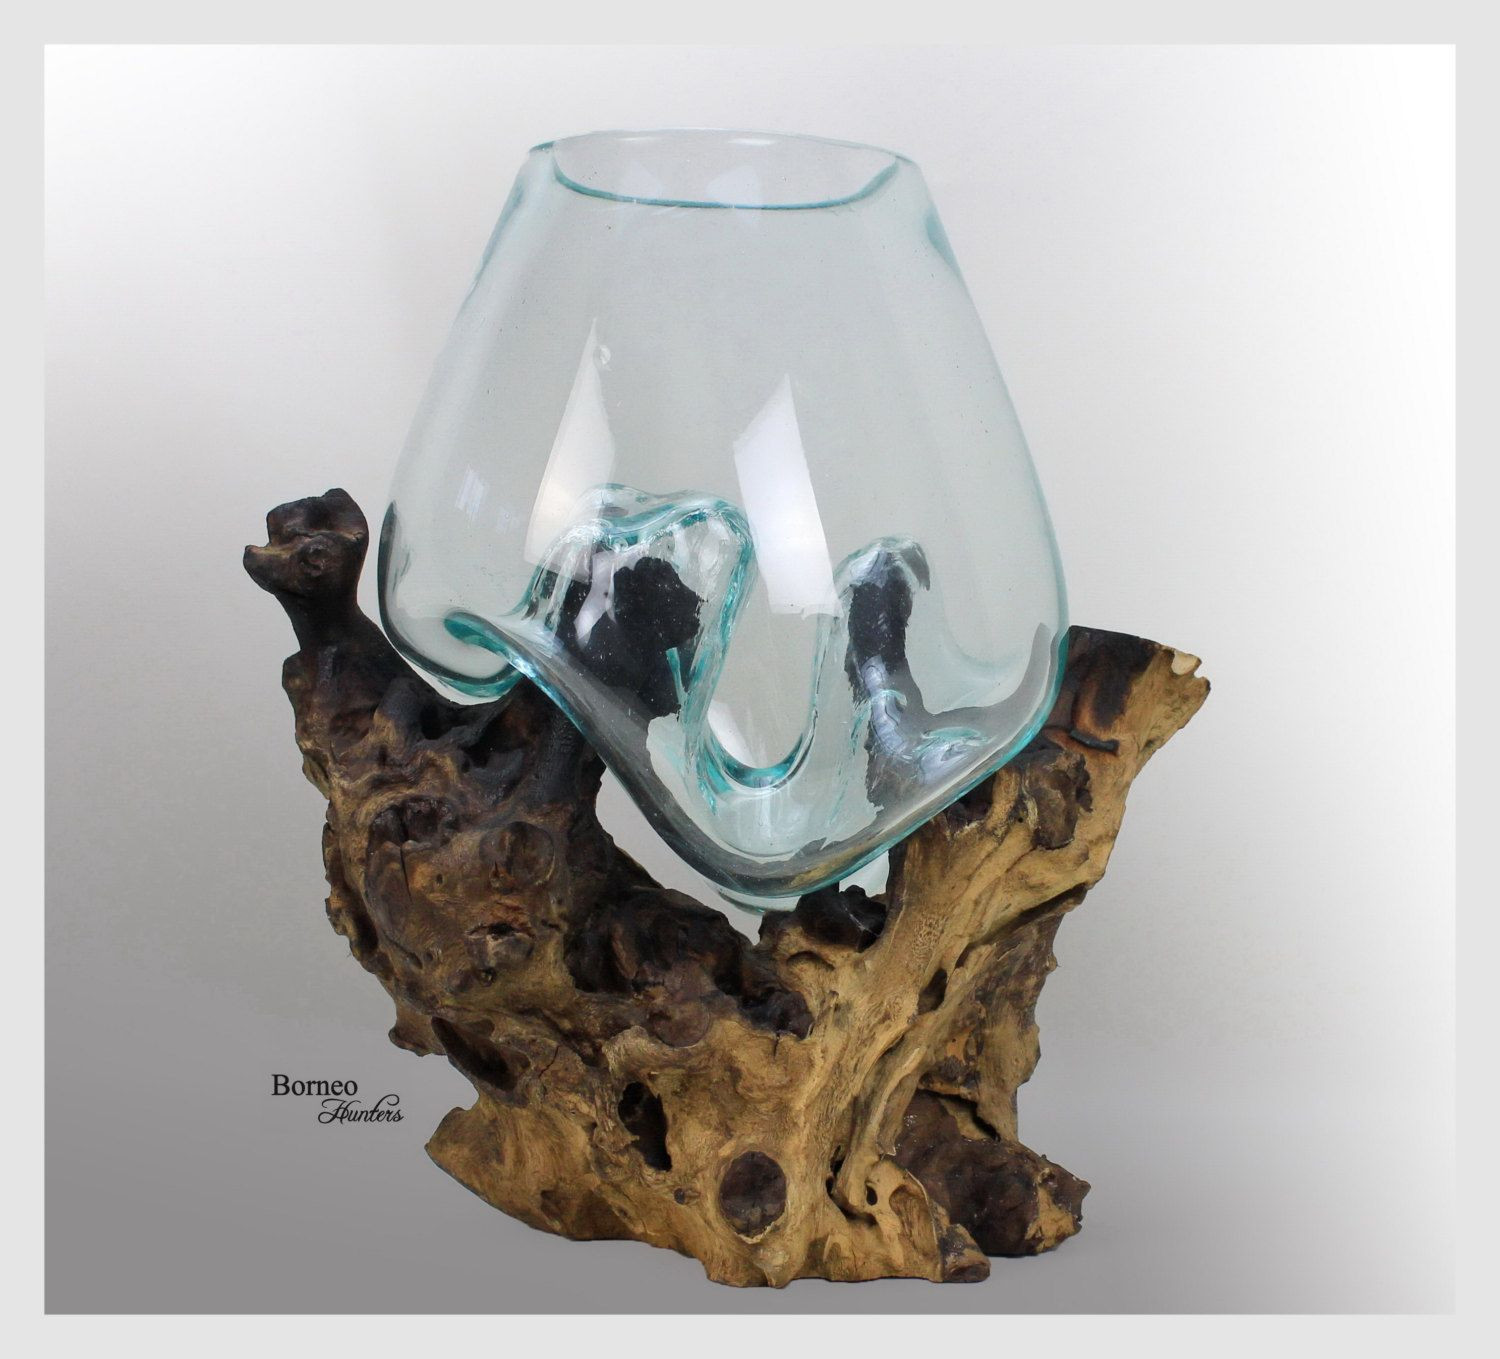 18 Great 6x6 Cylinder Vase 2024 free download 6x6 cylinder vase of hand blown molten glass on wood base sculpted terrarium vase fish with regard to hand blown molten glass on driftwood base sculpted terrarium vase fish bowl indoor plant